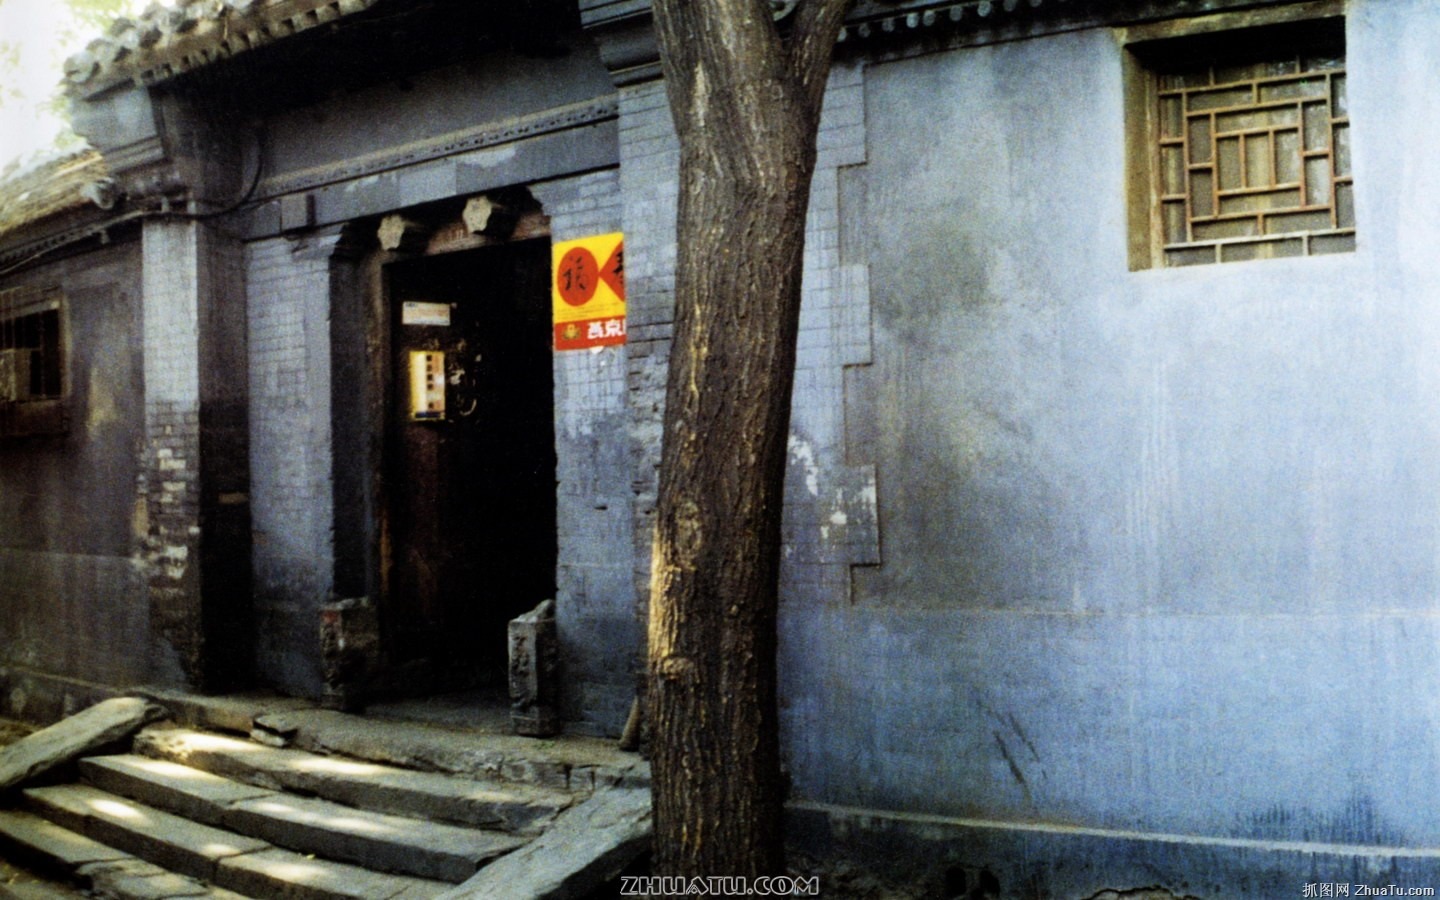 Old Hutong life for old photos wallpaper #26 - 1440x900